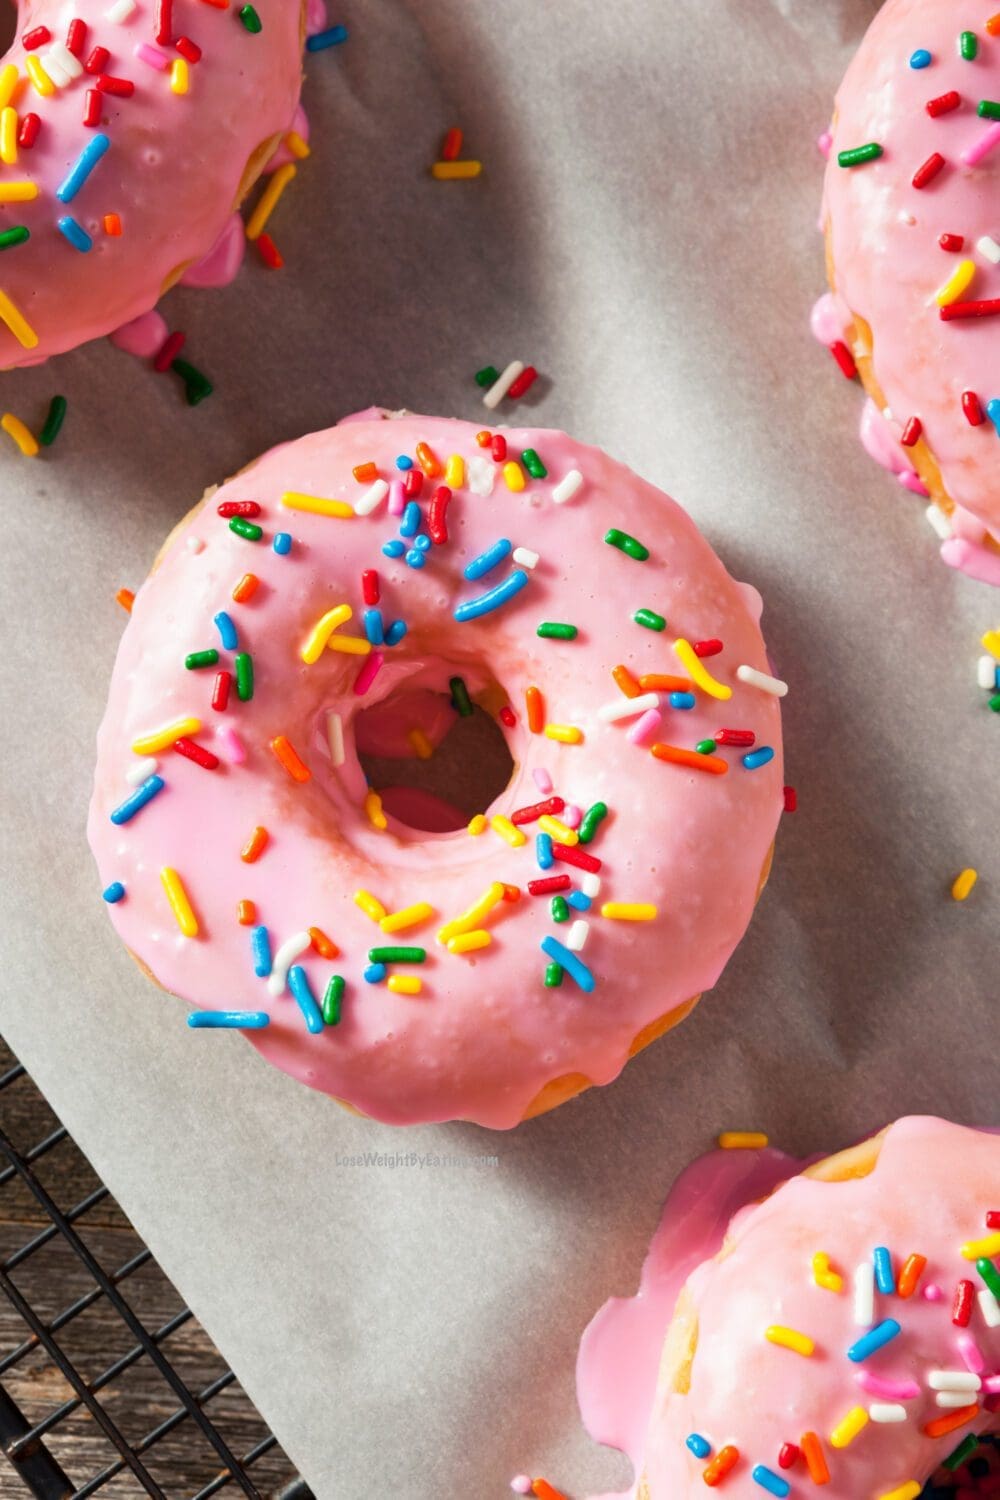 Low Calorie High Protein Donuts